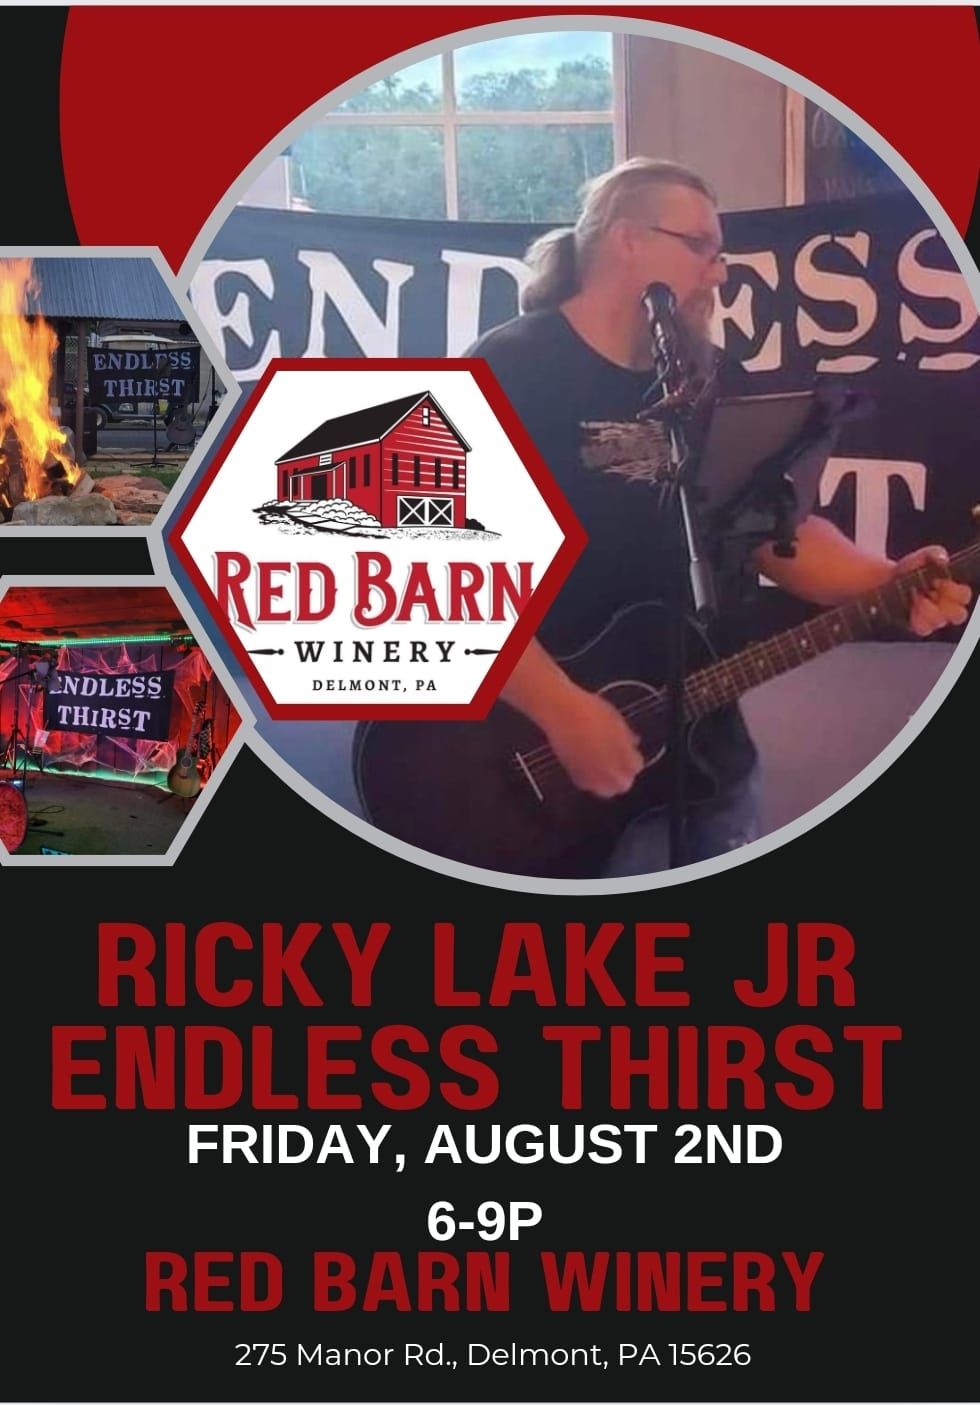 Ricky Lake Jr.\/Endless Thirst returns to the Red Barn Winery